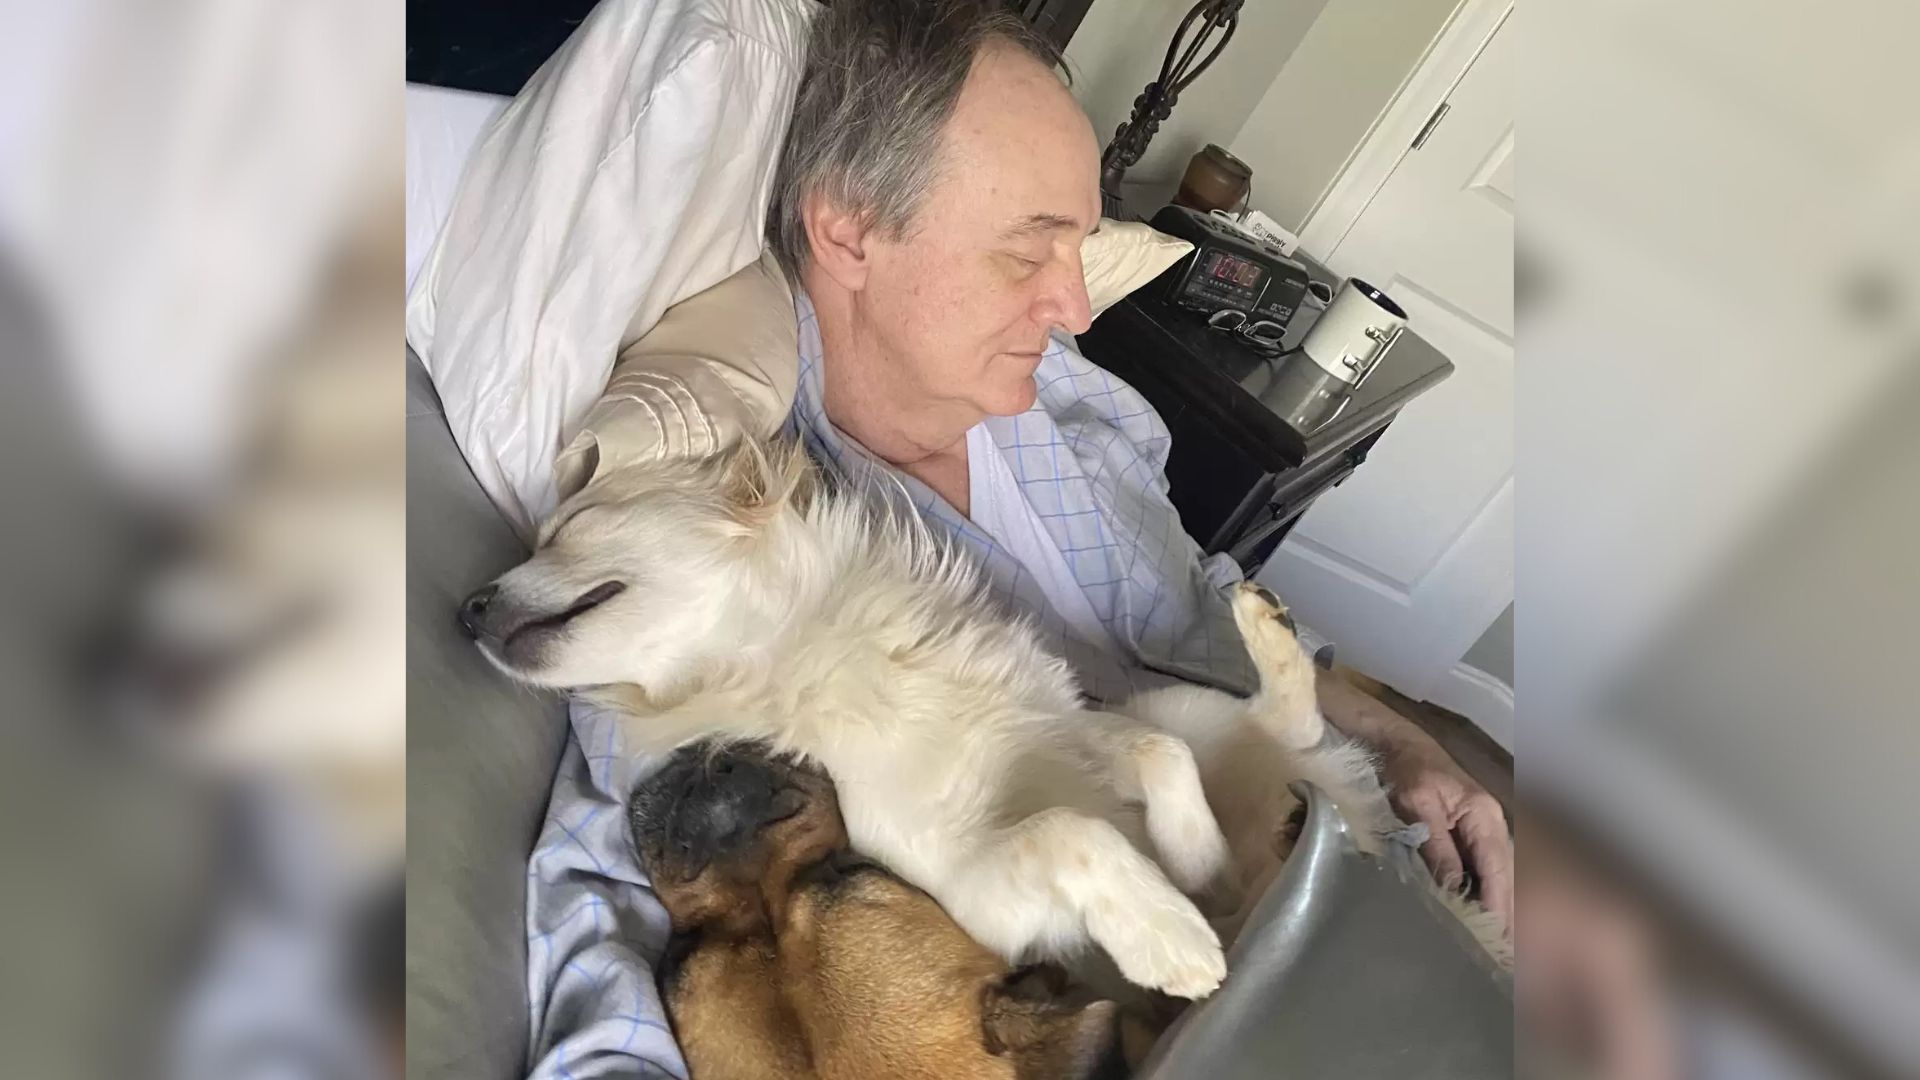 Witness This Amazing Dad Who Loves To Nap With Neighbor’s Dogs Whenever He Can